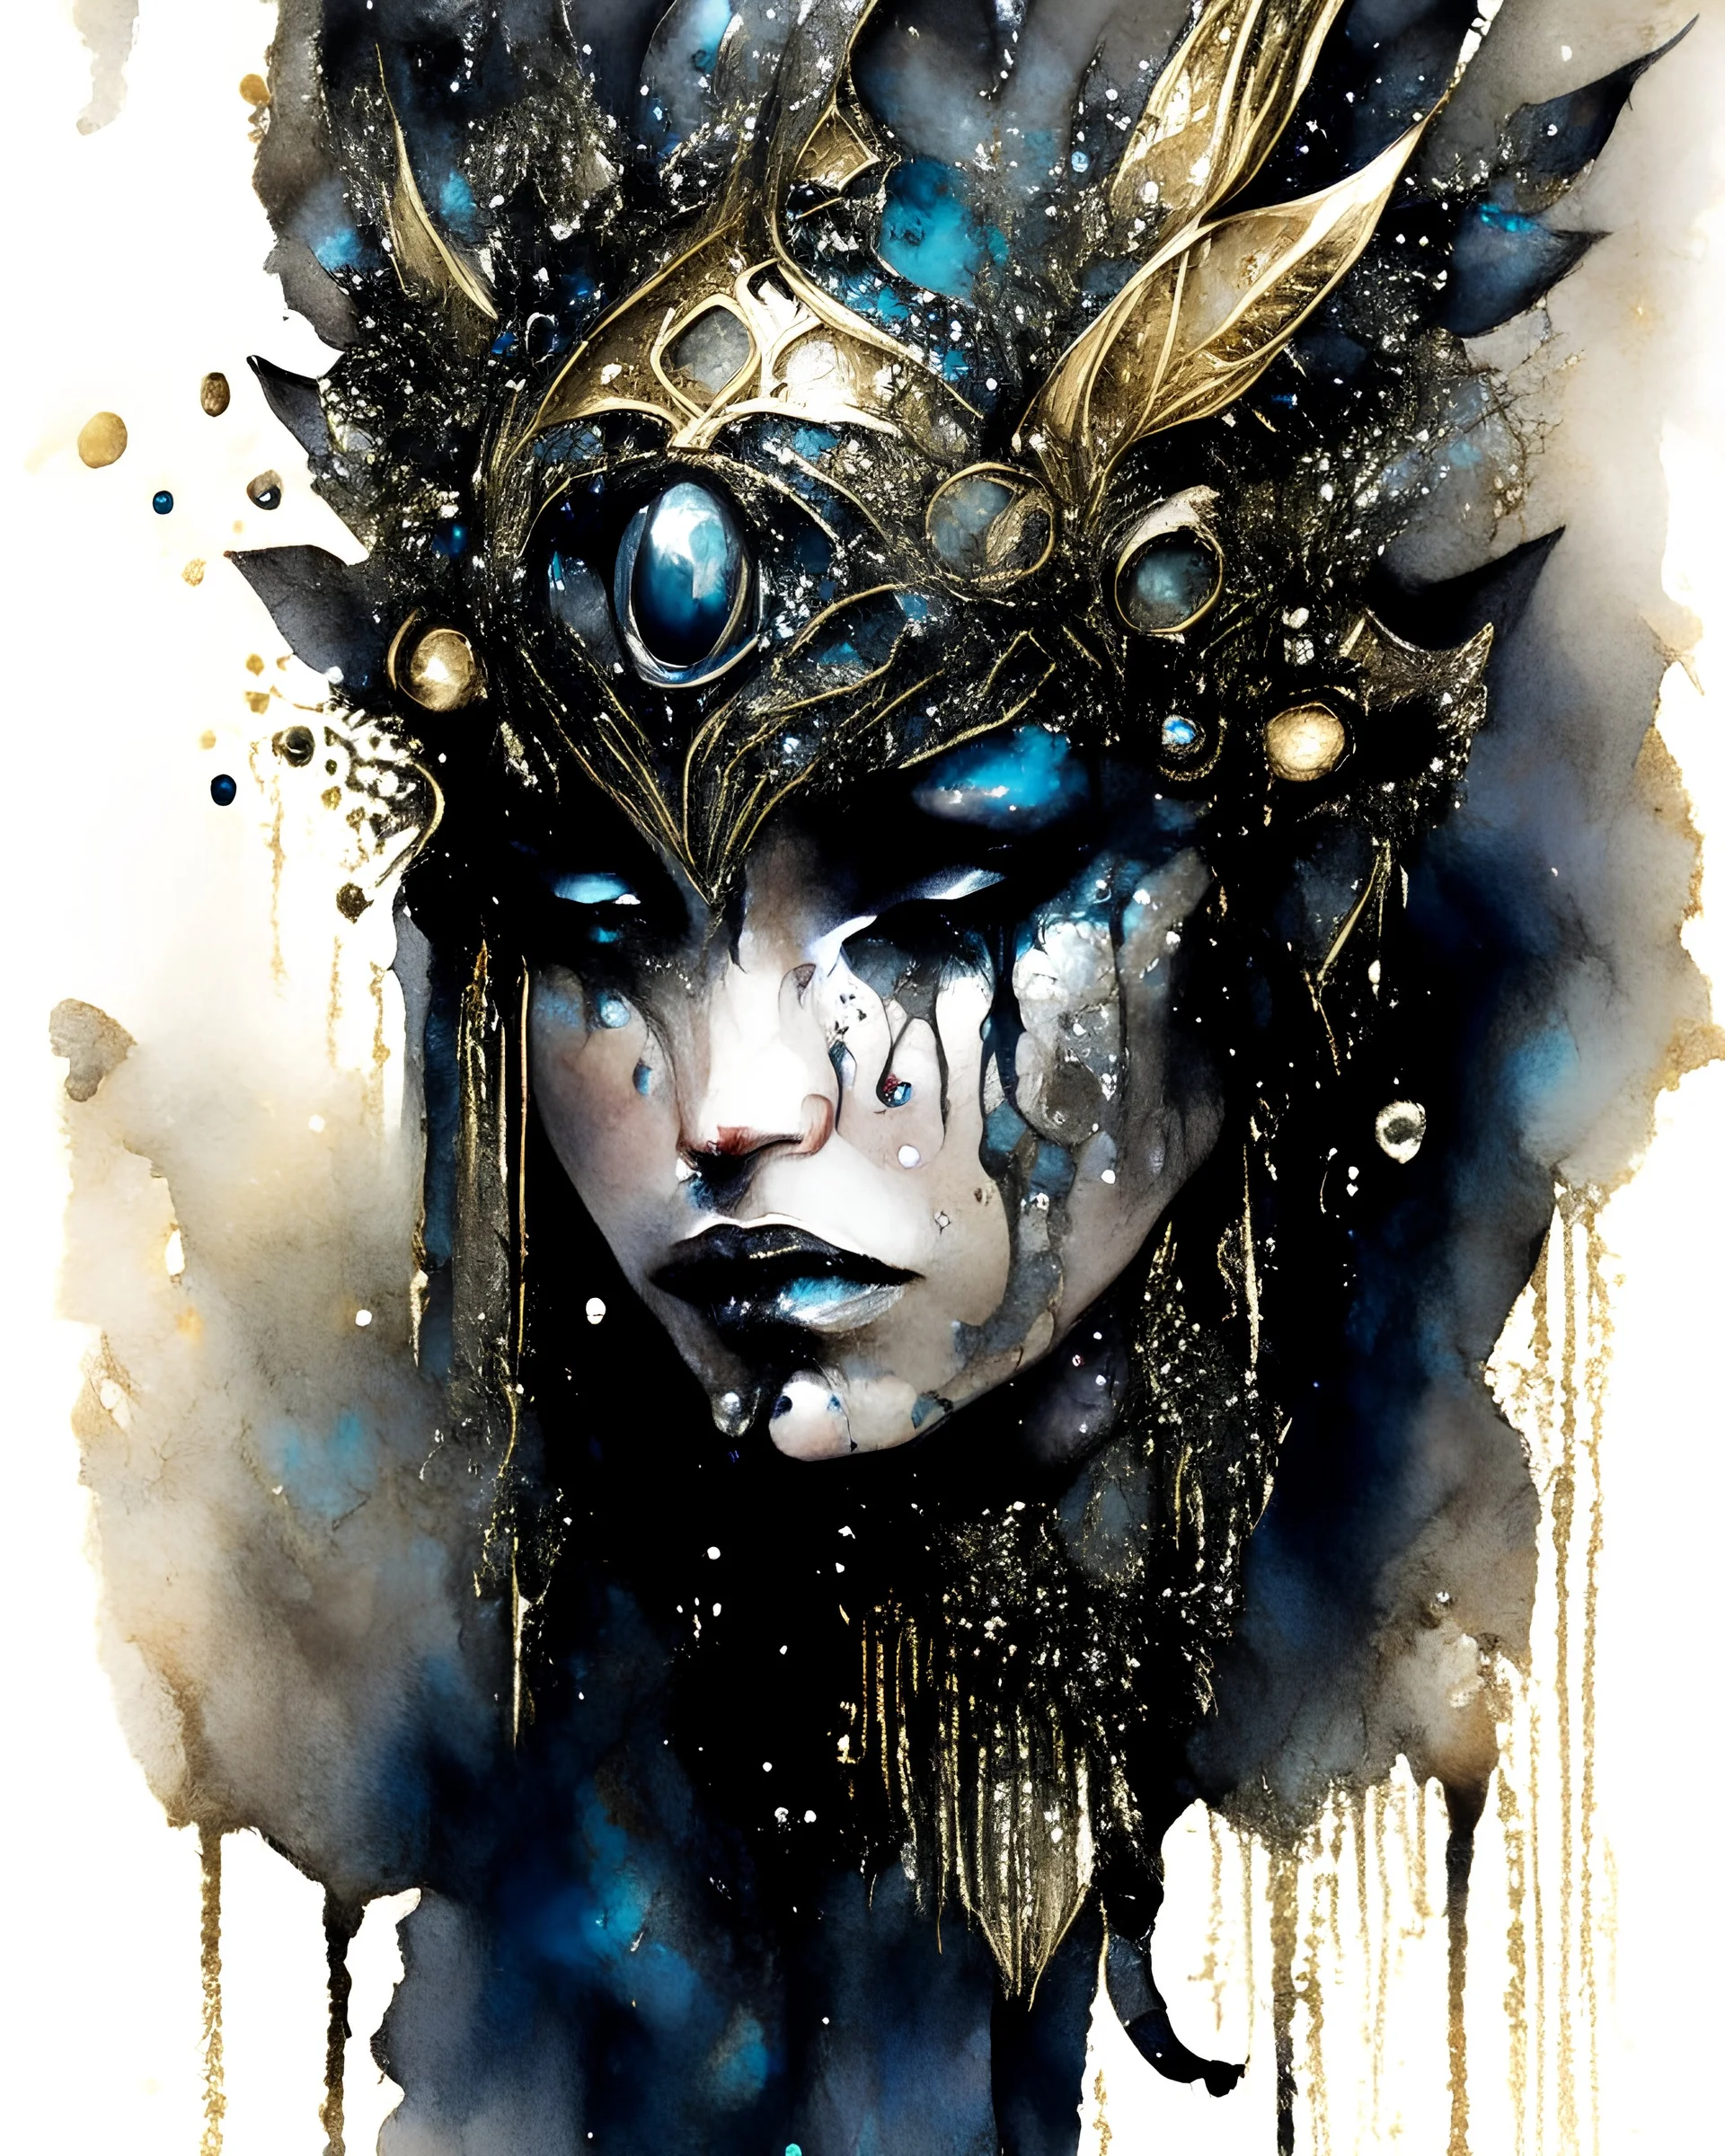 Aquarelle vantblack pouring Acrylic A beautiful voidcore shamanism biomechanical watercolour woman angelic Beauty extremely textured botanical faced portrait with a voidcore fil gothica headdress with metallic filigree gothica ornaments around ribbed with agate stones half face mand azurit mineral stone metallic watercolour palimpsest steampunk filigree Golden voidcore shamanism foral pansy margaréta daisy black ink on half face masque gothica filigree voidcore athmospheric organic bio spinal